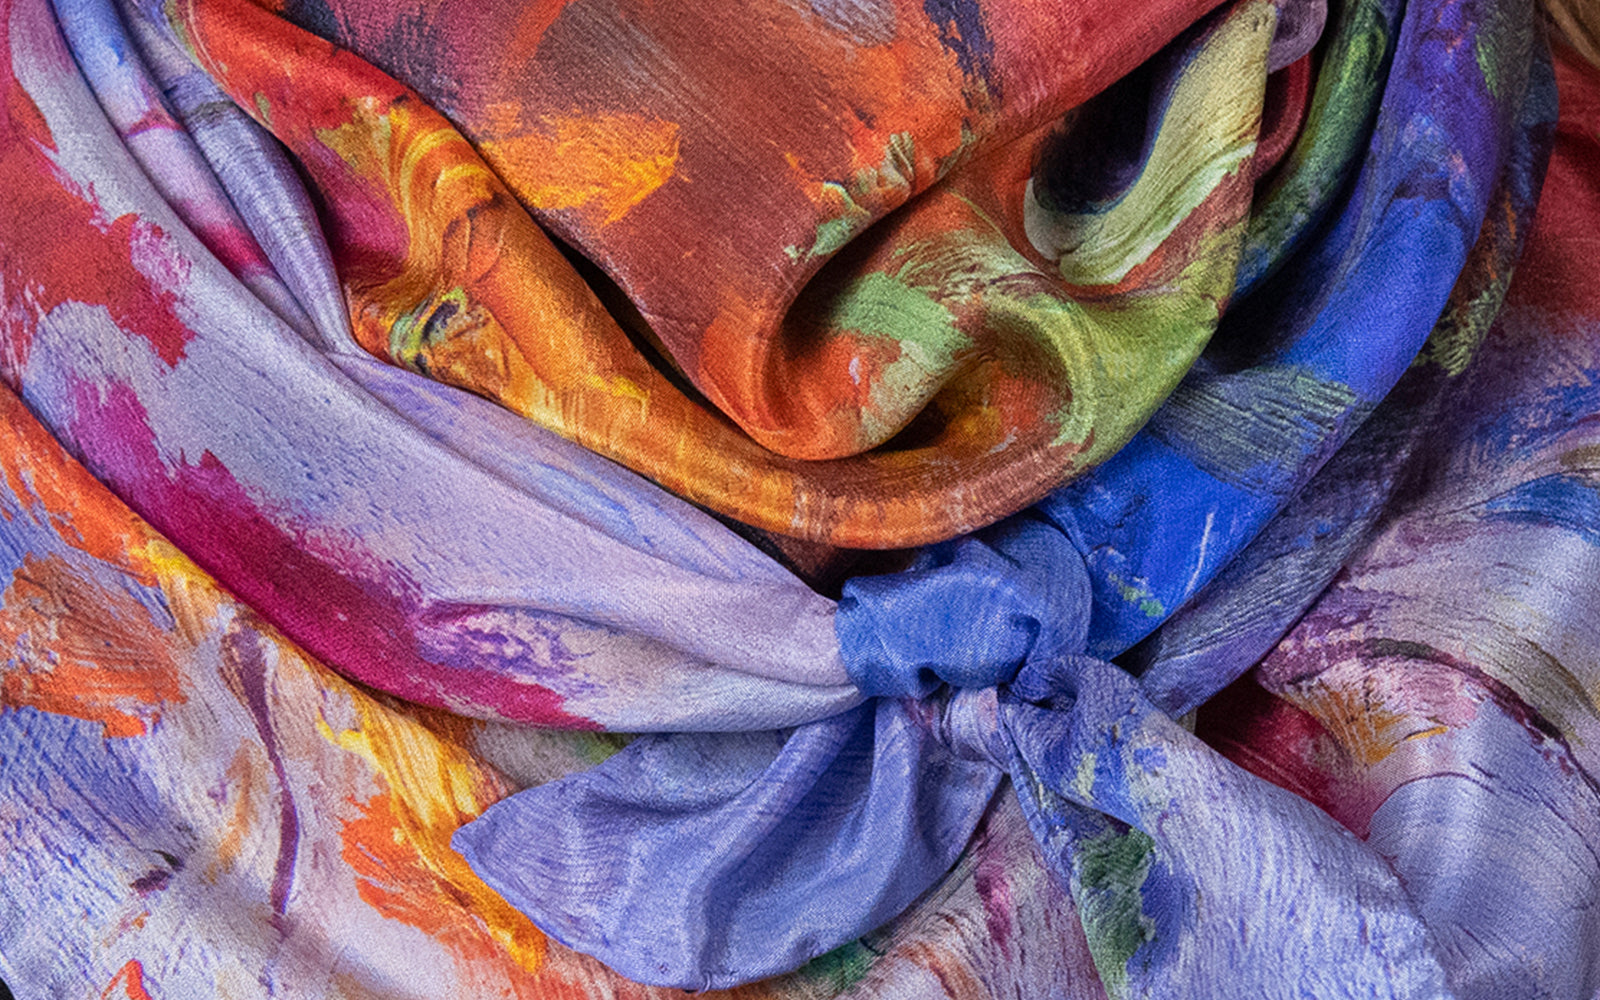 Close-up detail of multi-colored Lavender Dream Italian-made 100% silk scarf from Oksana Fine Art and Design, shown as tied around neck.